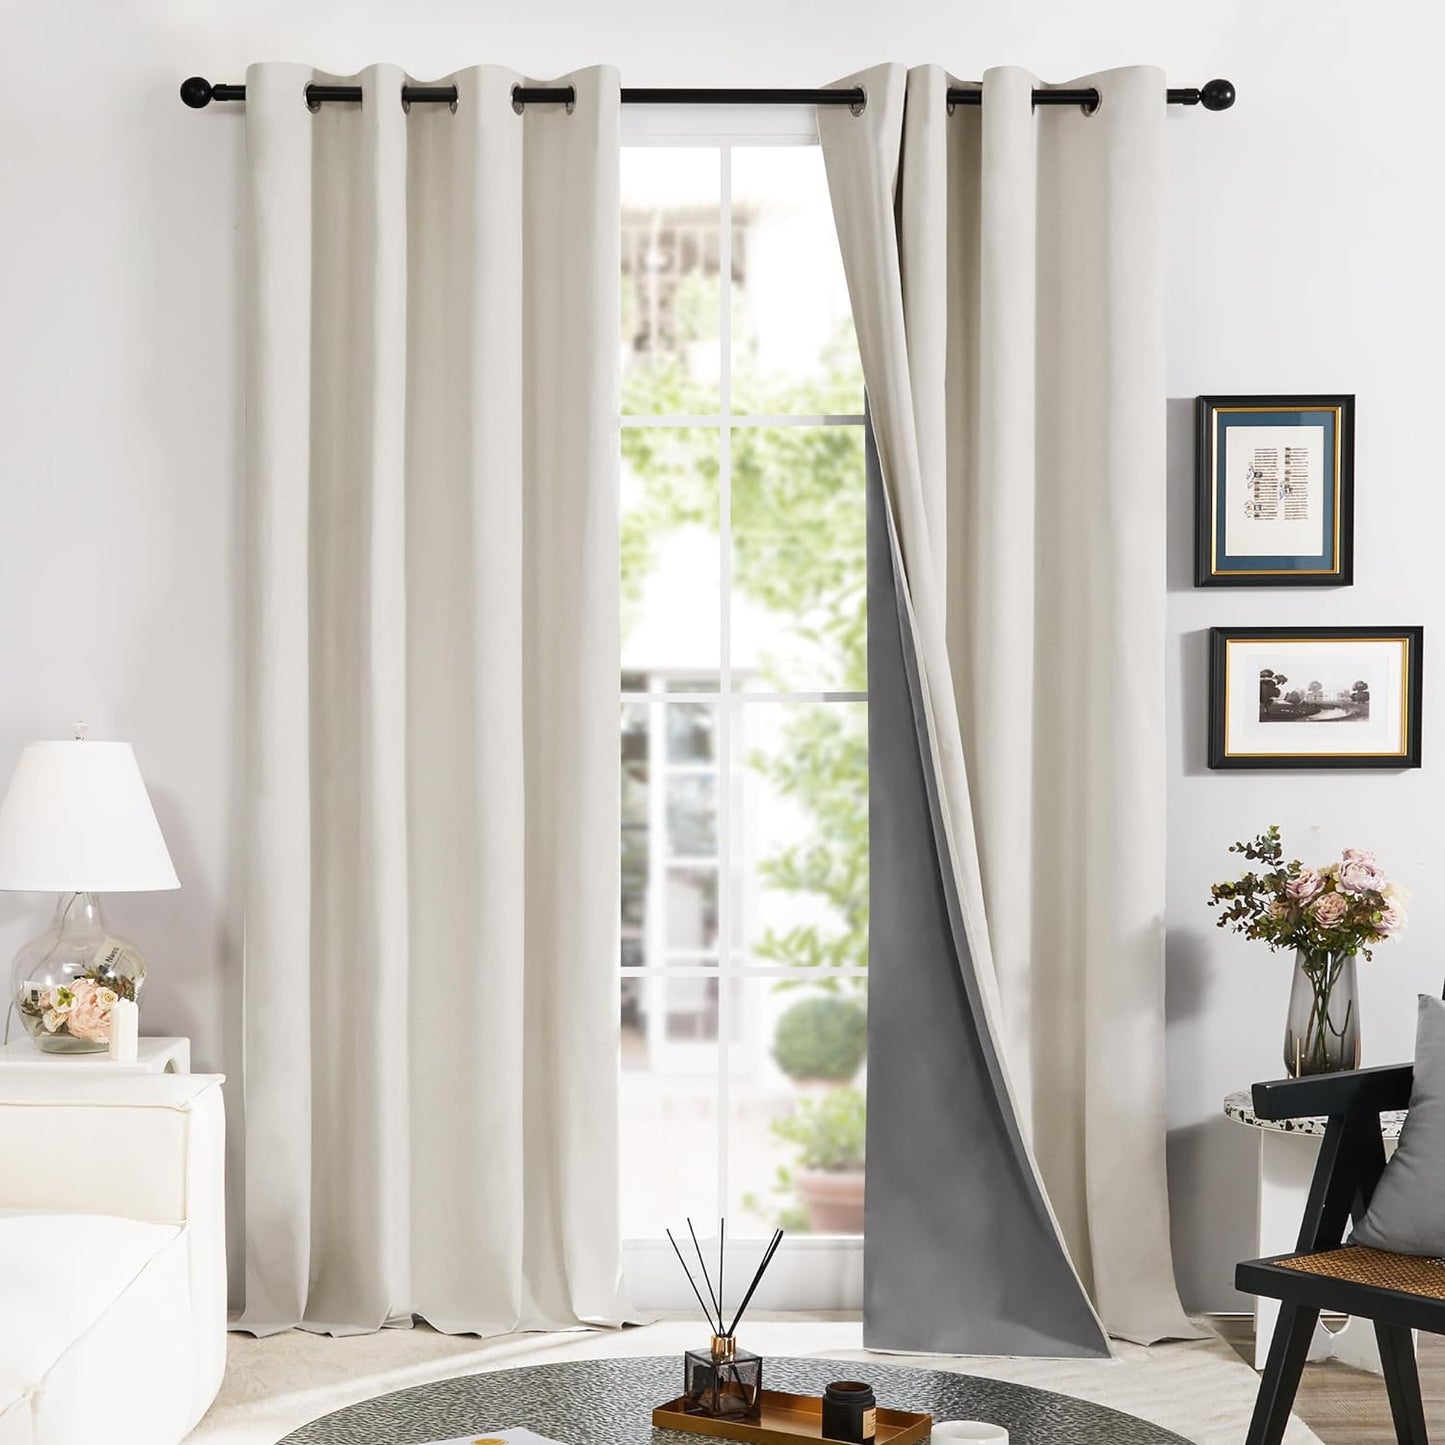 Deconovo Linen Blackout Curtains 84 Inch Length Set of 2, Thermal Curtain Drapes with Grey Coating, Total Light Blocking Waterproof Curtains for Indoor/Outdoor (Light Grey, 52W X 84L Inch)  Deconovo Cream 52X108 Inches 